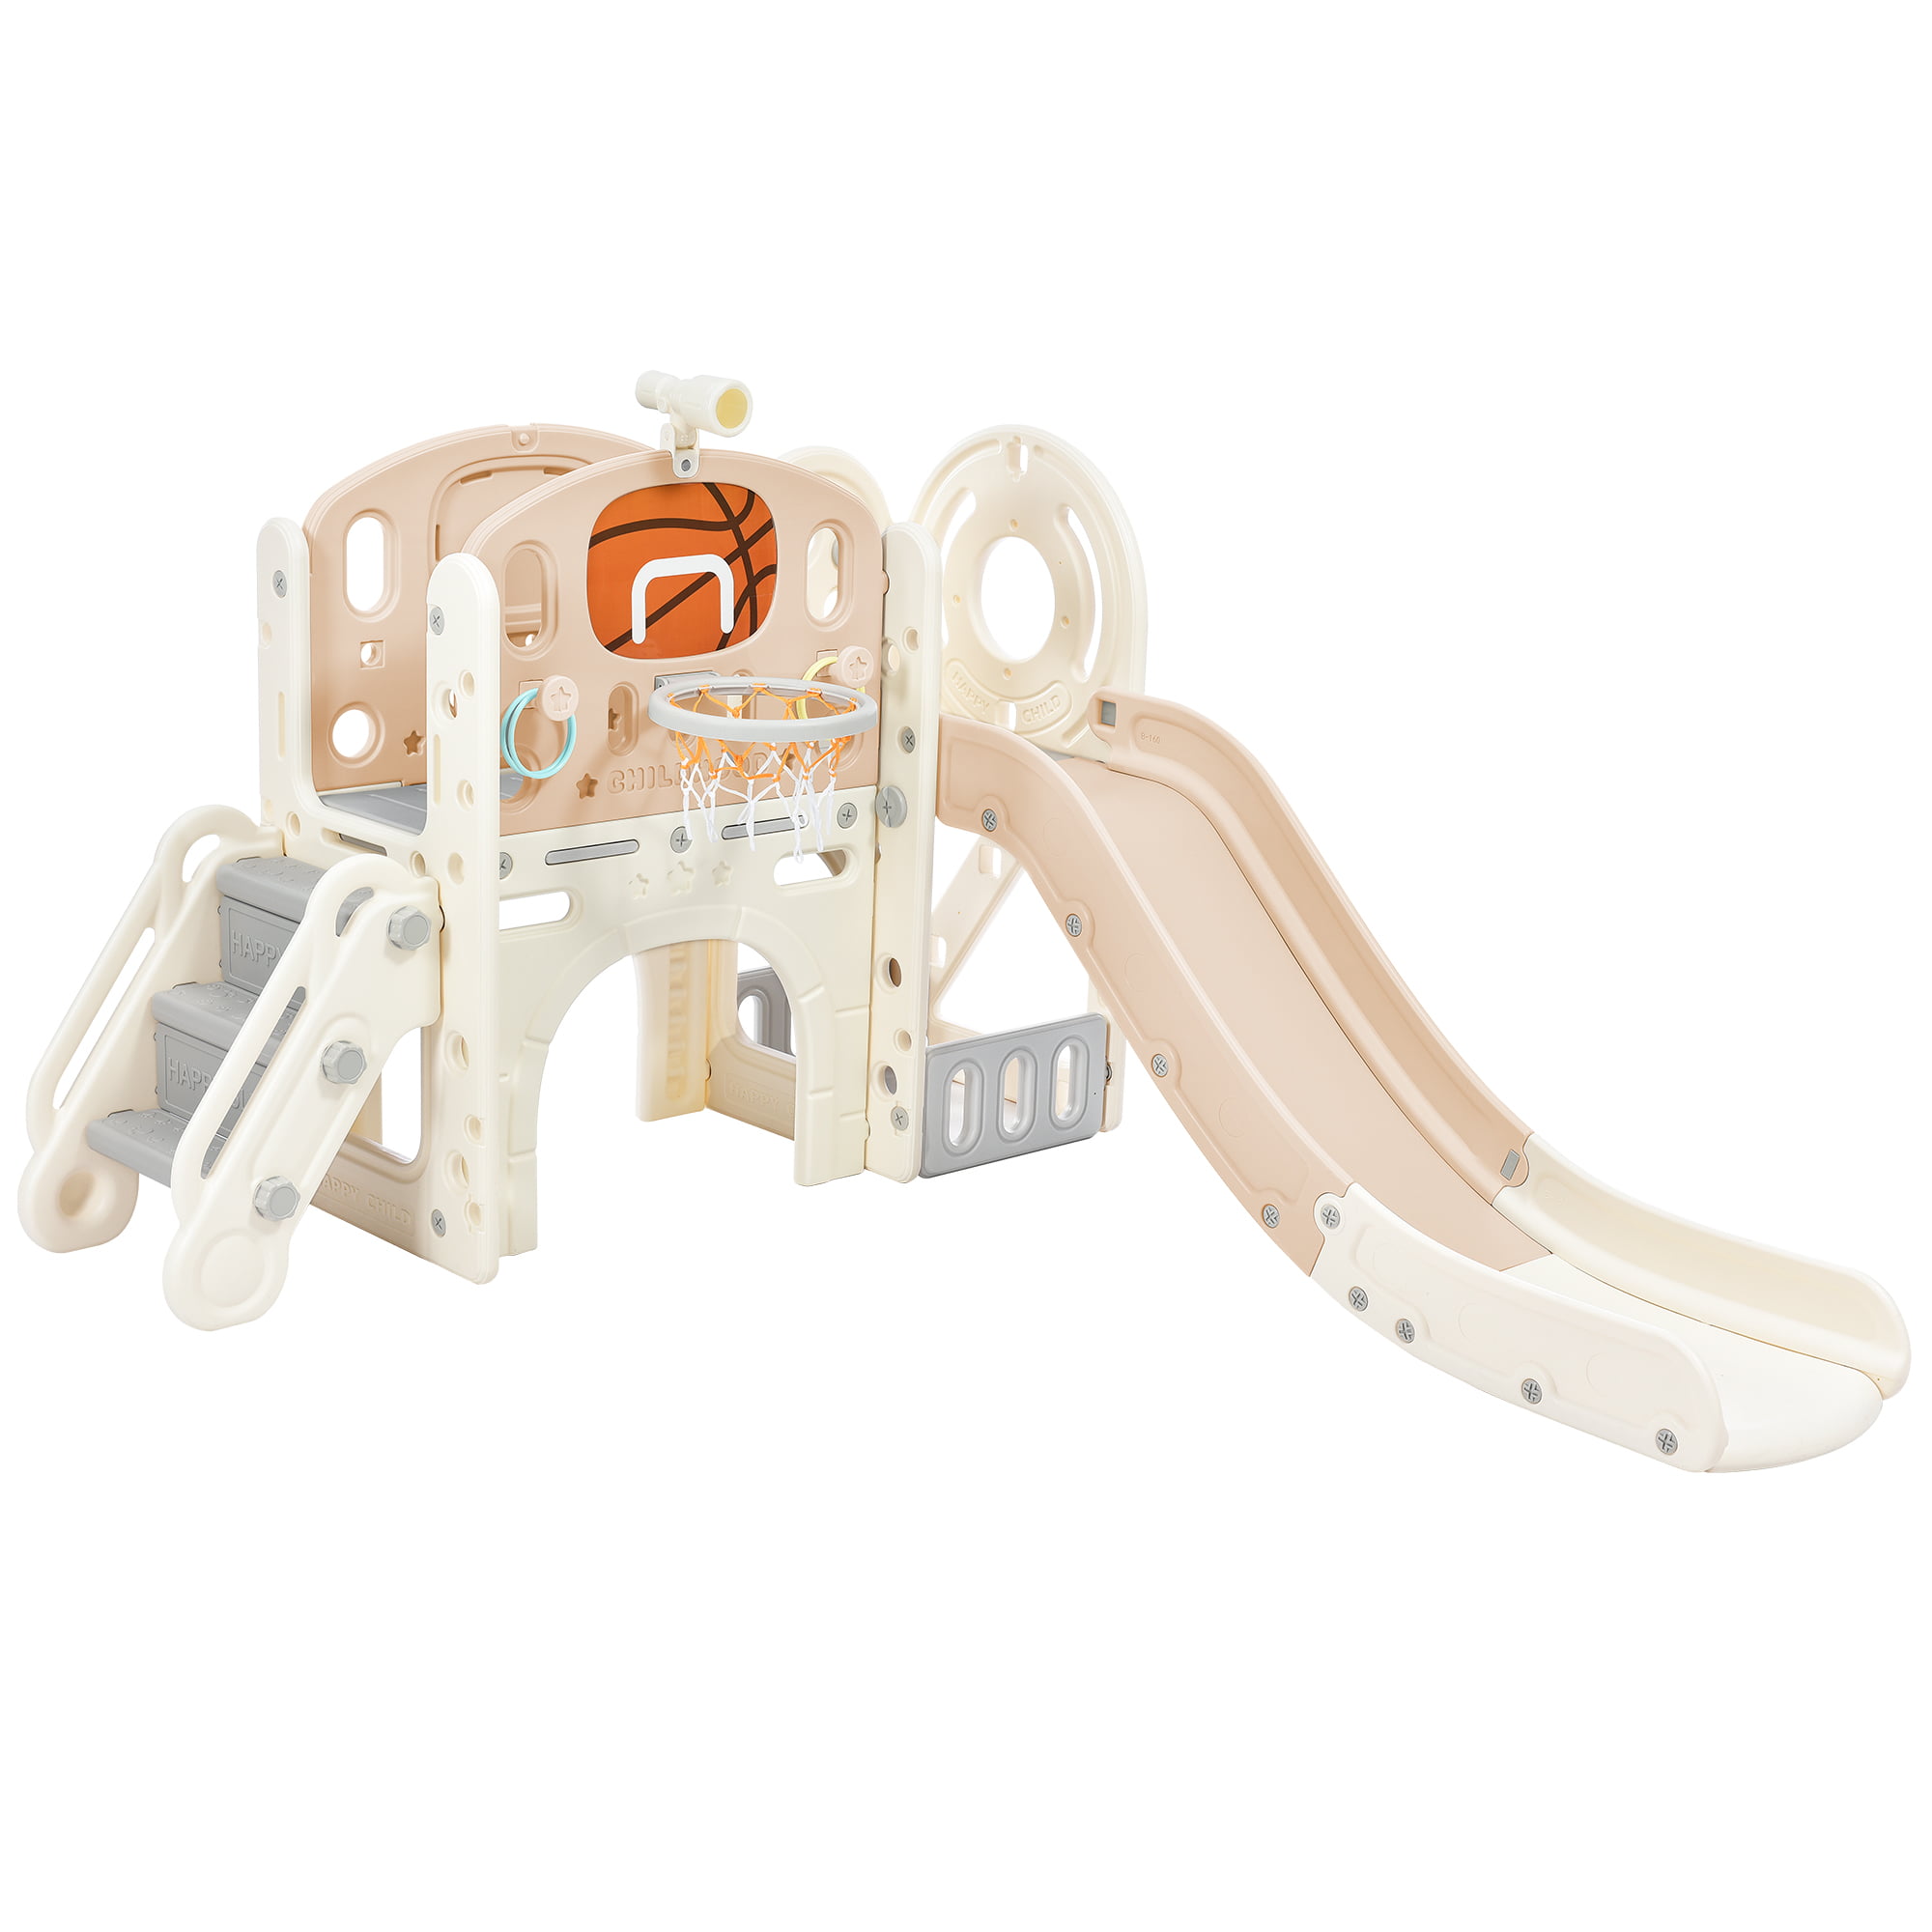 Crawling Castle Climbing Playhouse with Slide